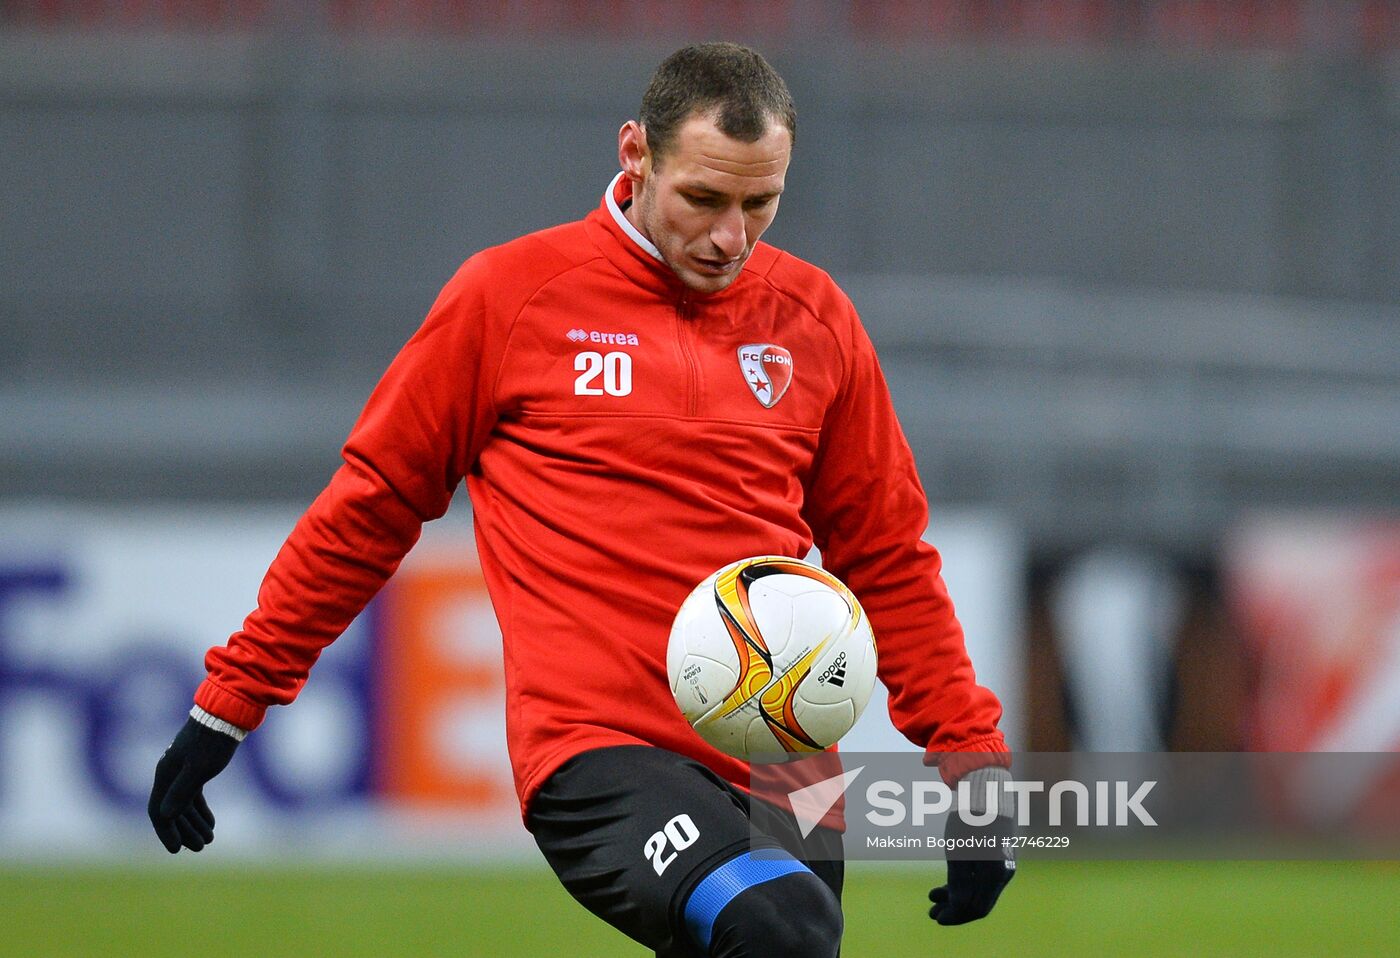 Football. Europa League. FC Sion holds training session